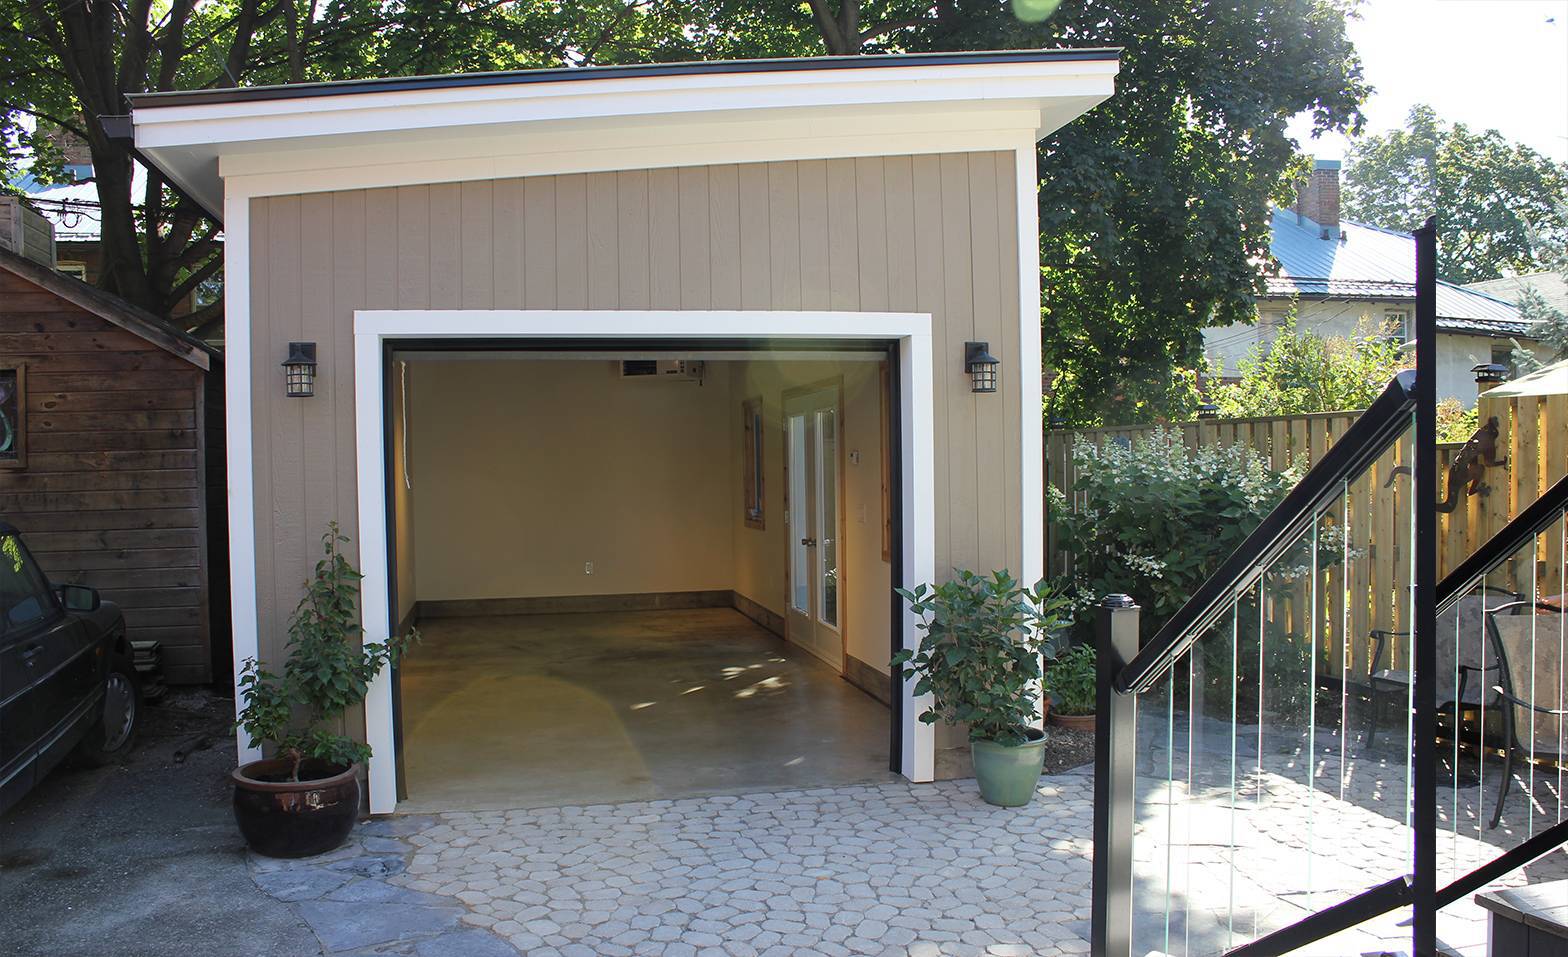 Front view of 12' x 24' Canexel Urban Garage located in Scarborough, Ontario – Summerwood Products